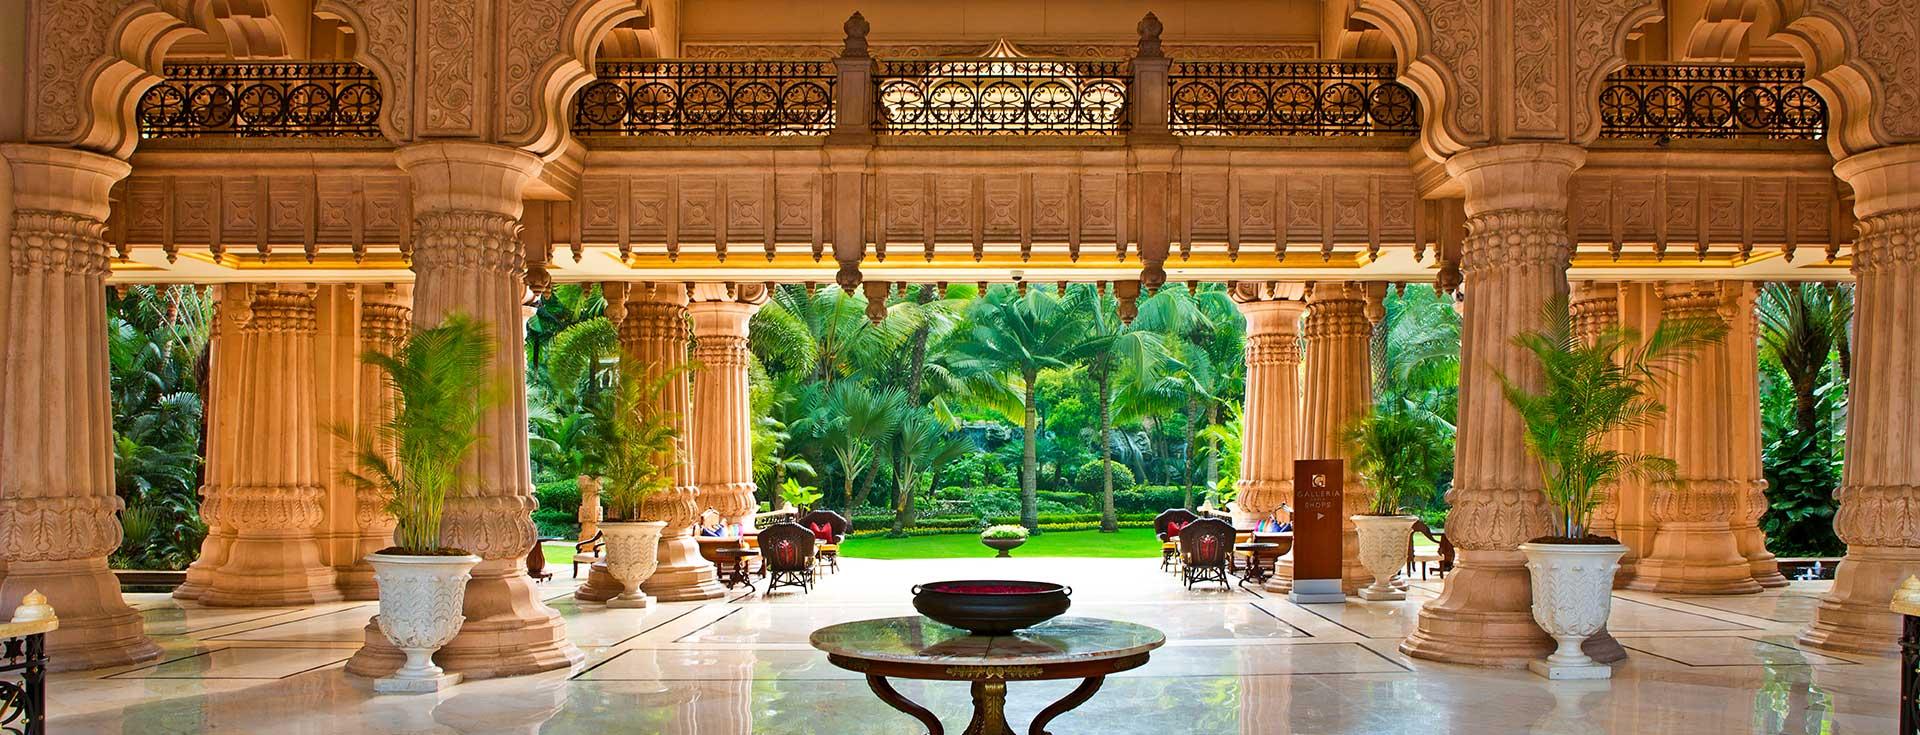 Madhav Sehgal appointed as General Manager of The Leela Palace Bengaluru